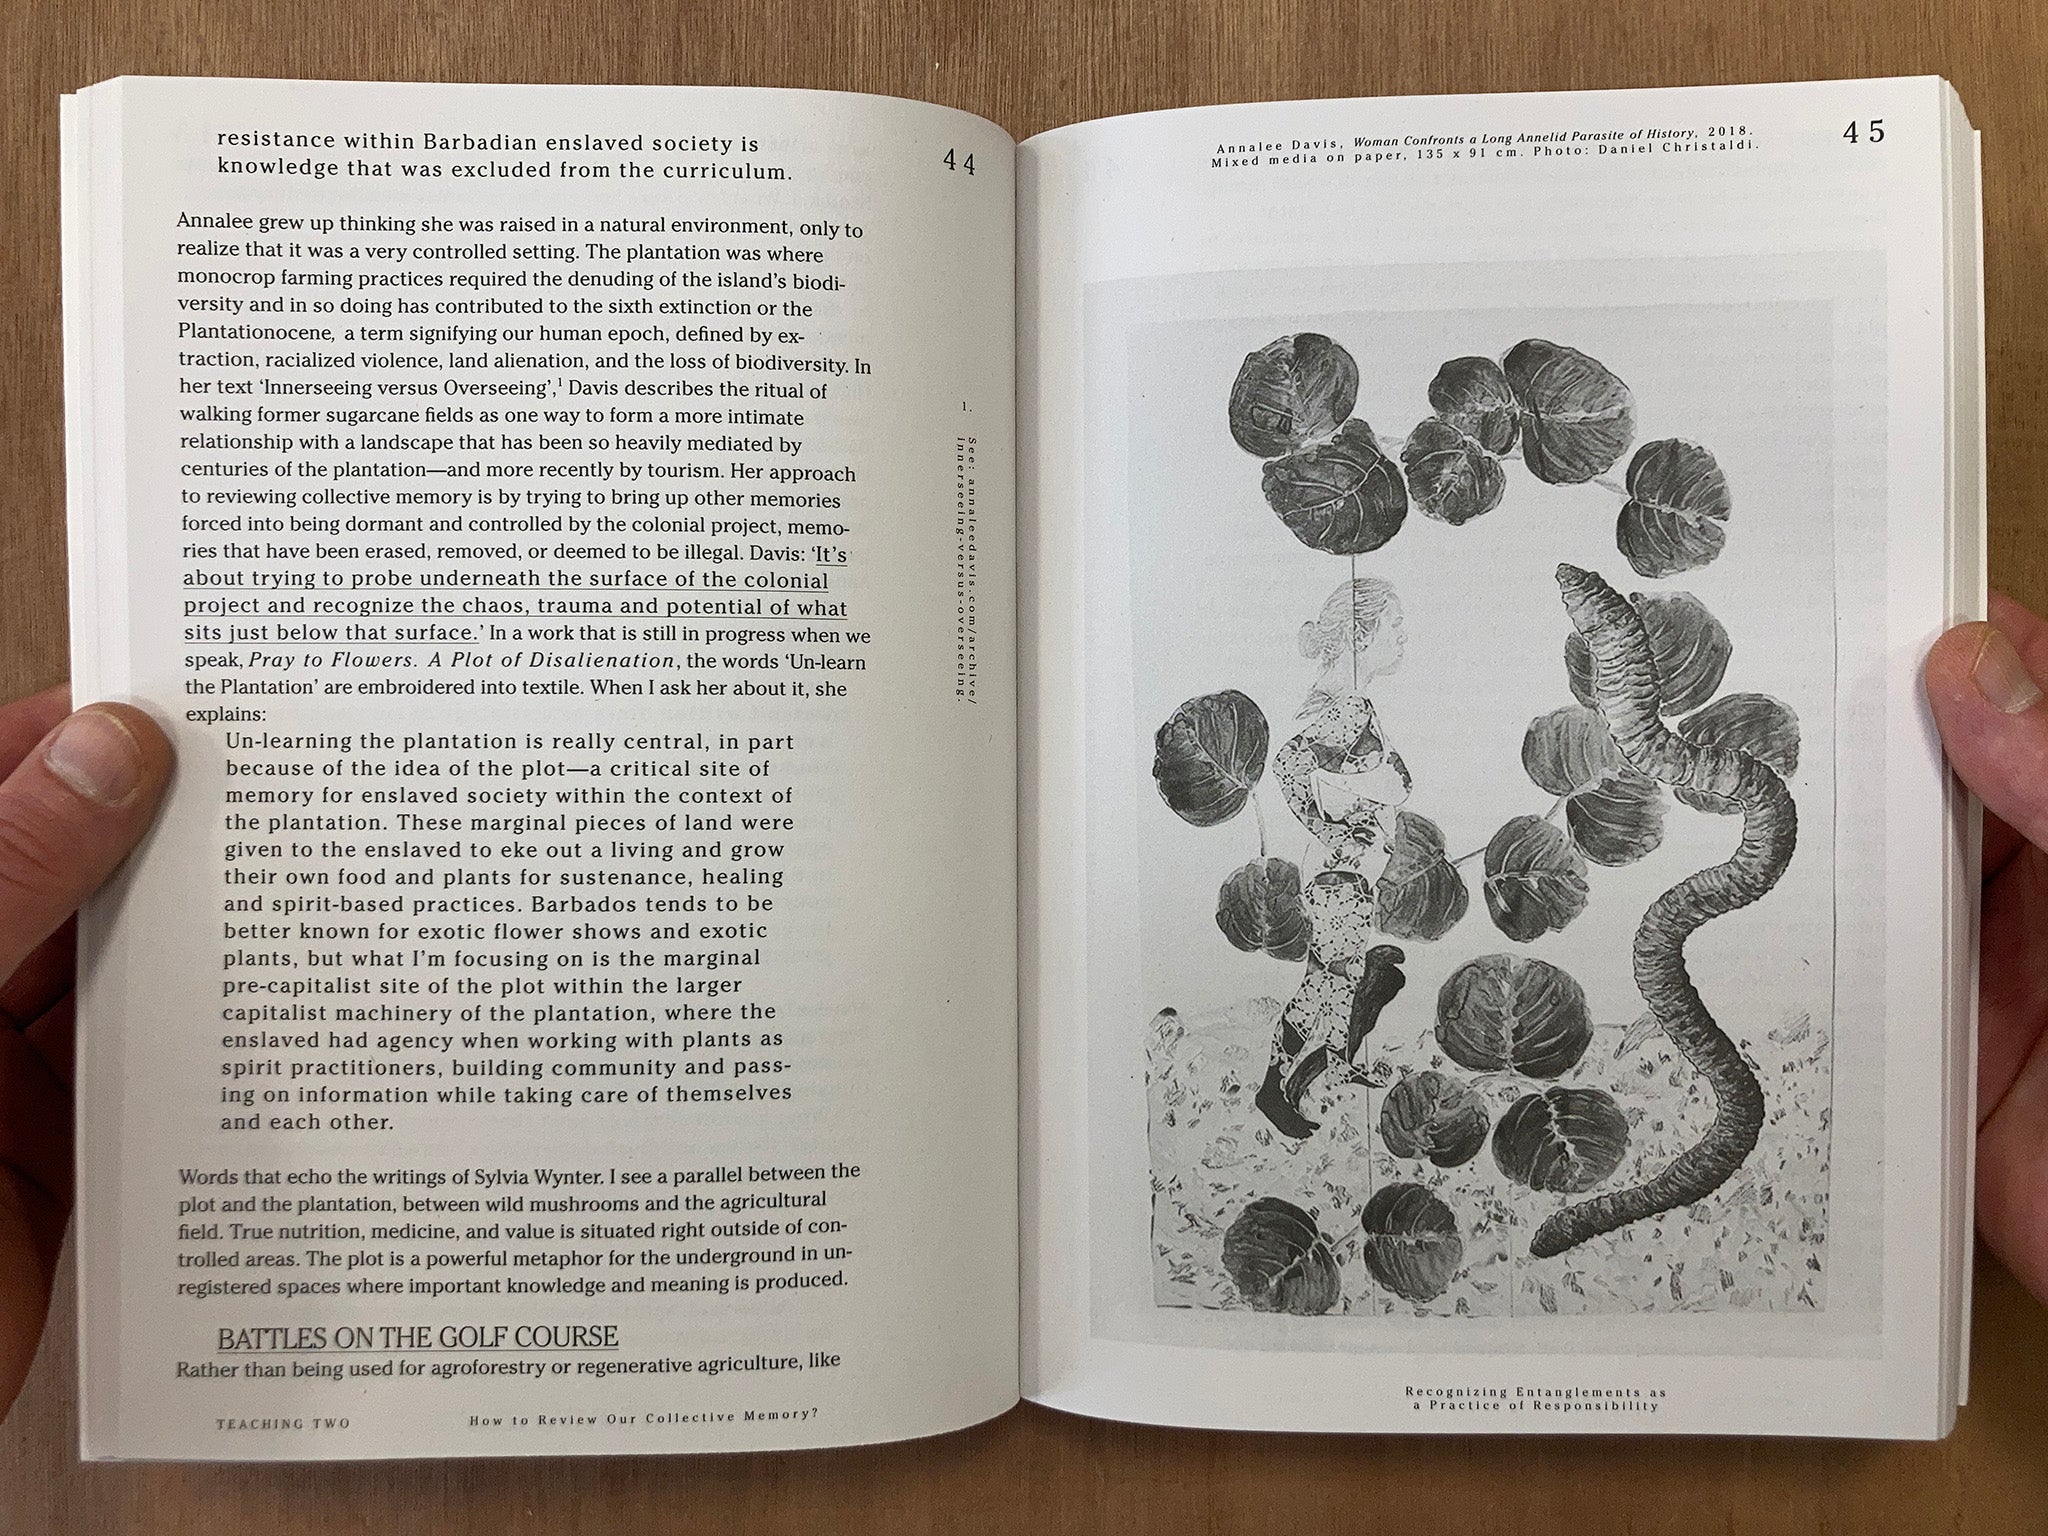 LET’S BECOME FUNGAL!: MYCELIUM TEACHINGS AND THE ARTS by Yasmine Ostendorf-Rodríguez